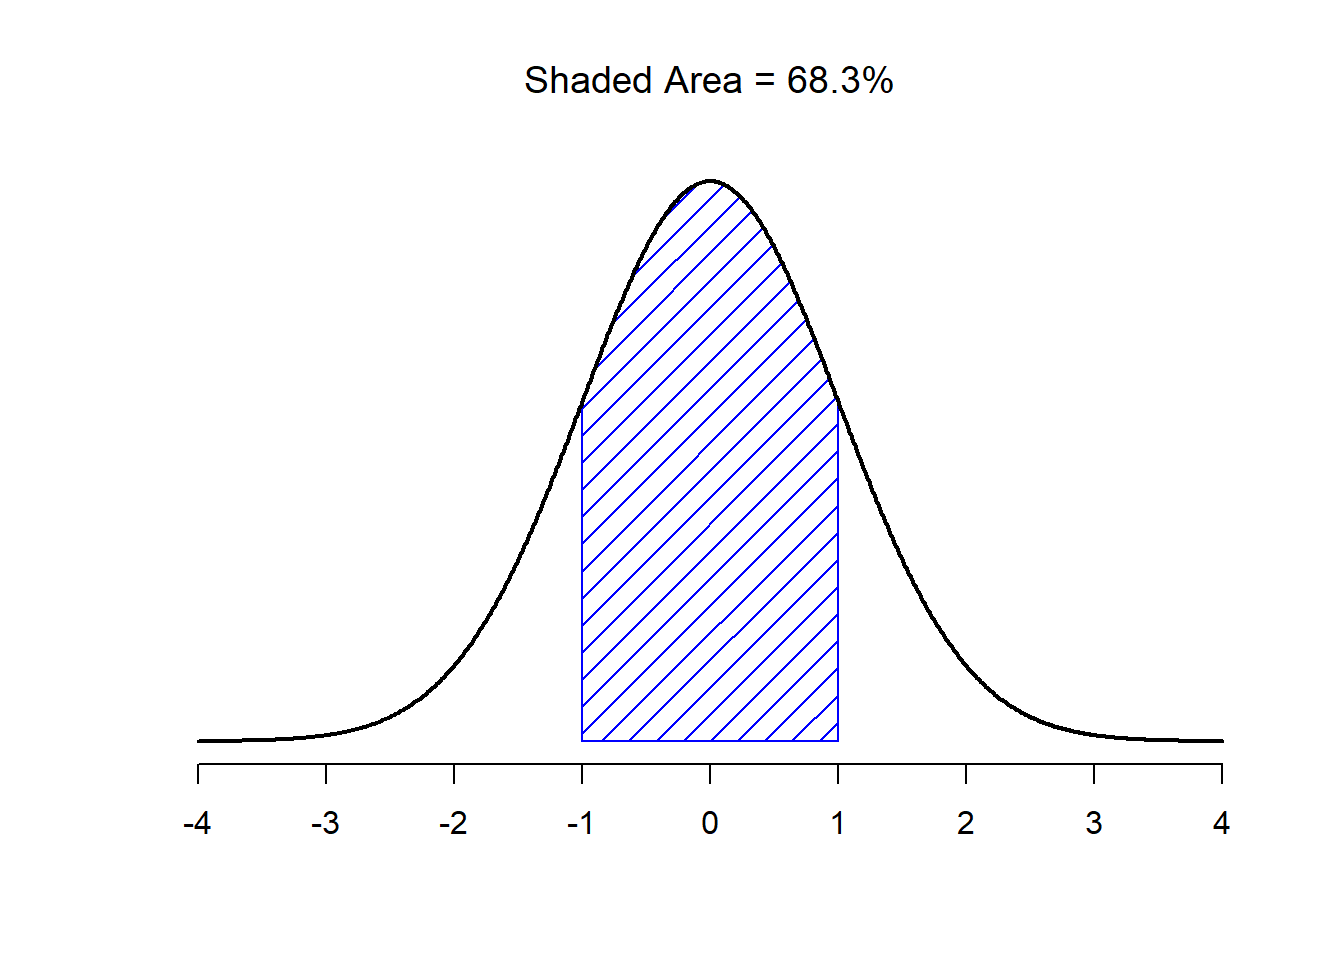 The area under the curve tells you the probability that an observation falls within a particular range. The solid lines plot normal distributions with mean $mu=0$ and standard deviation $sigma=1$. The shaded areas illustrate "areas under the curve" for two important cases. Here we can see that there is a 68.3% chance that an observation will fall within one standard deviation of the mean